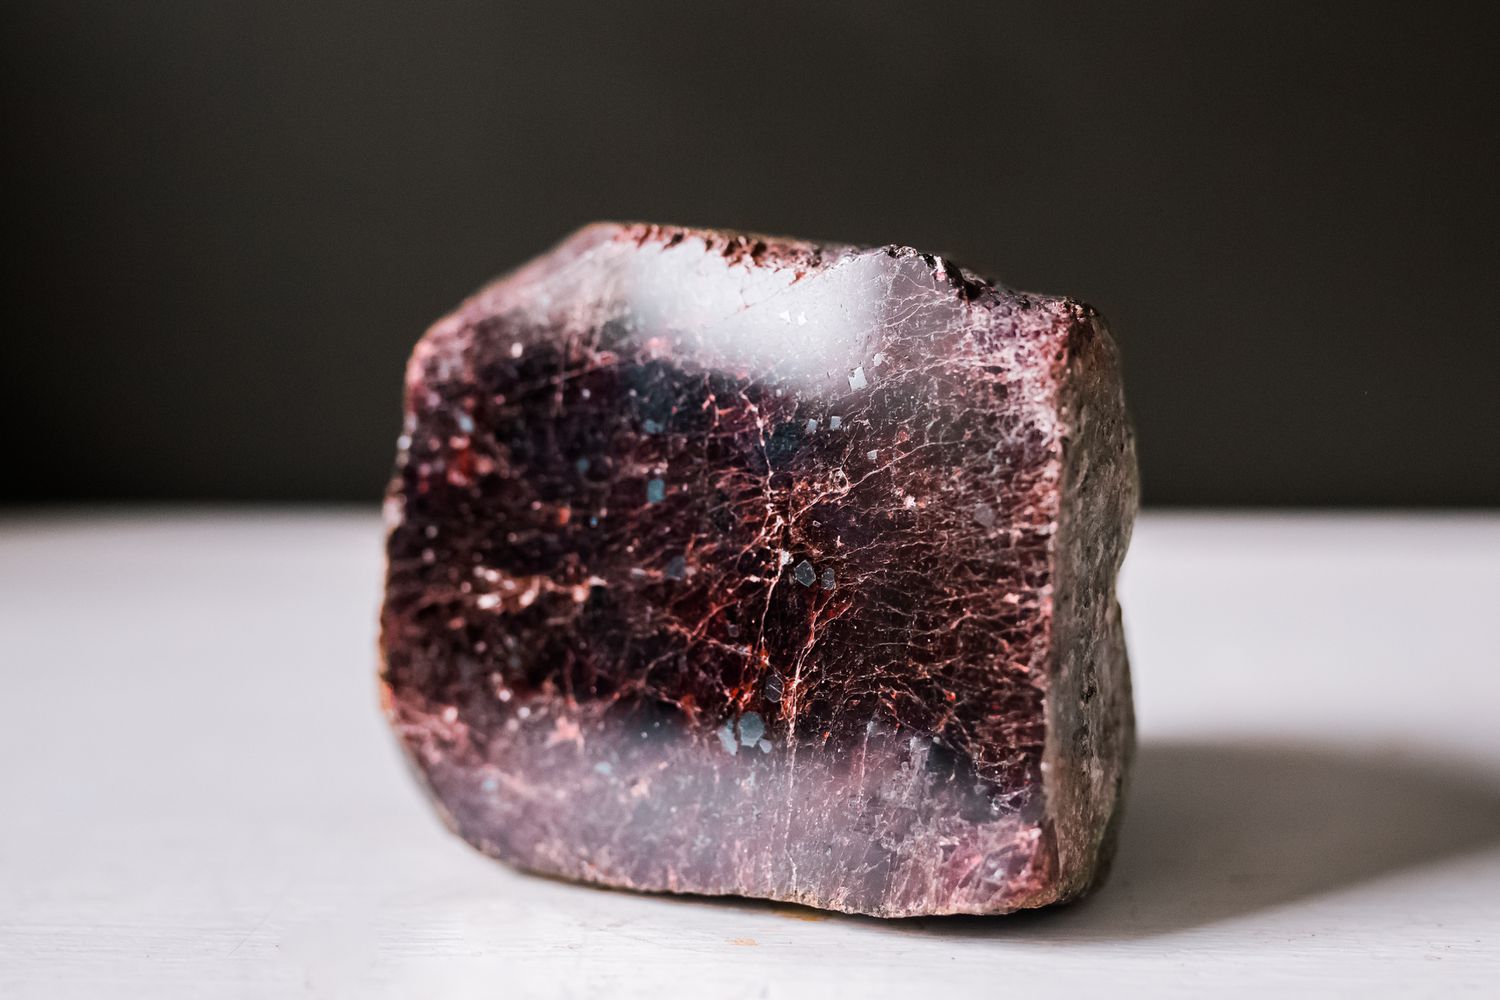 A Garnet gemstone placed on a white table